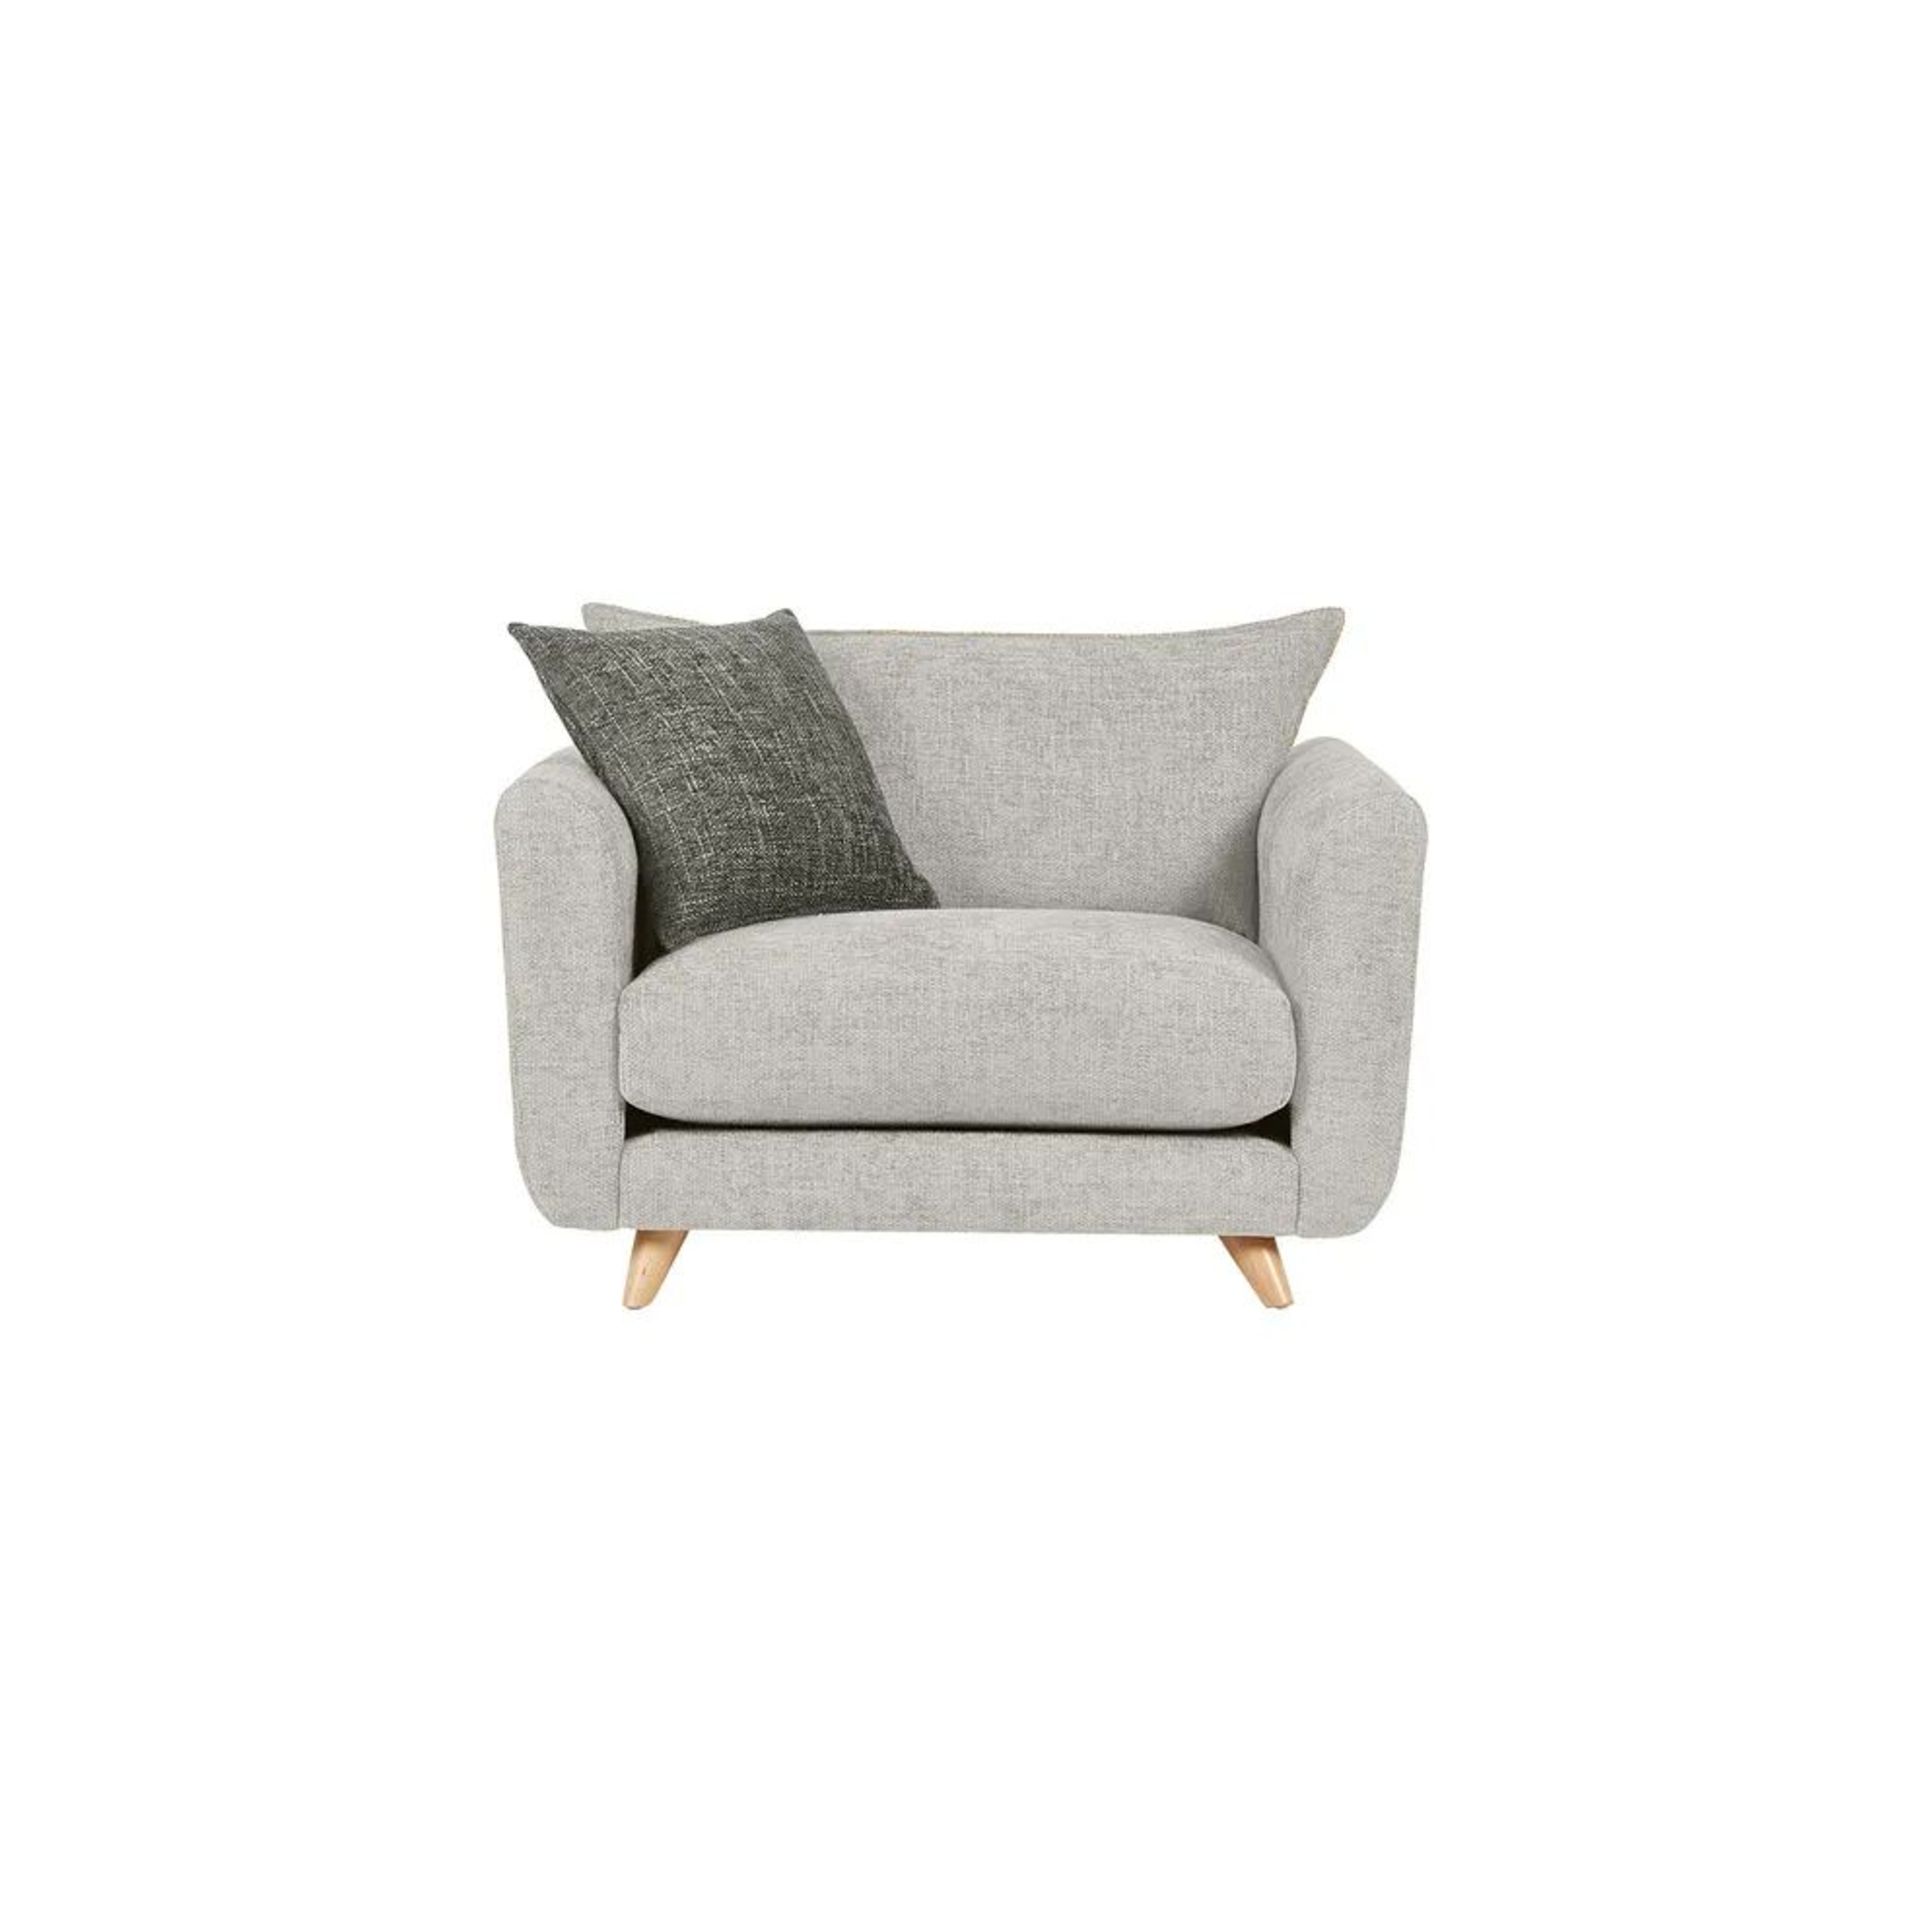 BRAND NEW DALBY High Back Loveseat - SILVER FABRIC. RRP £1149. Our Dalby loveseat, shown here in - Image 2 of 6